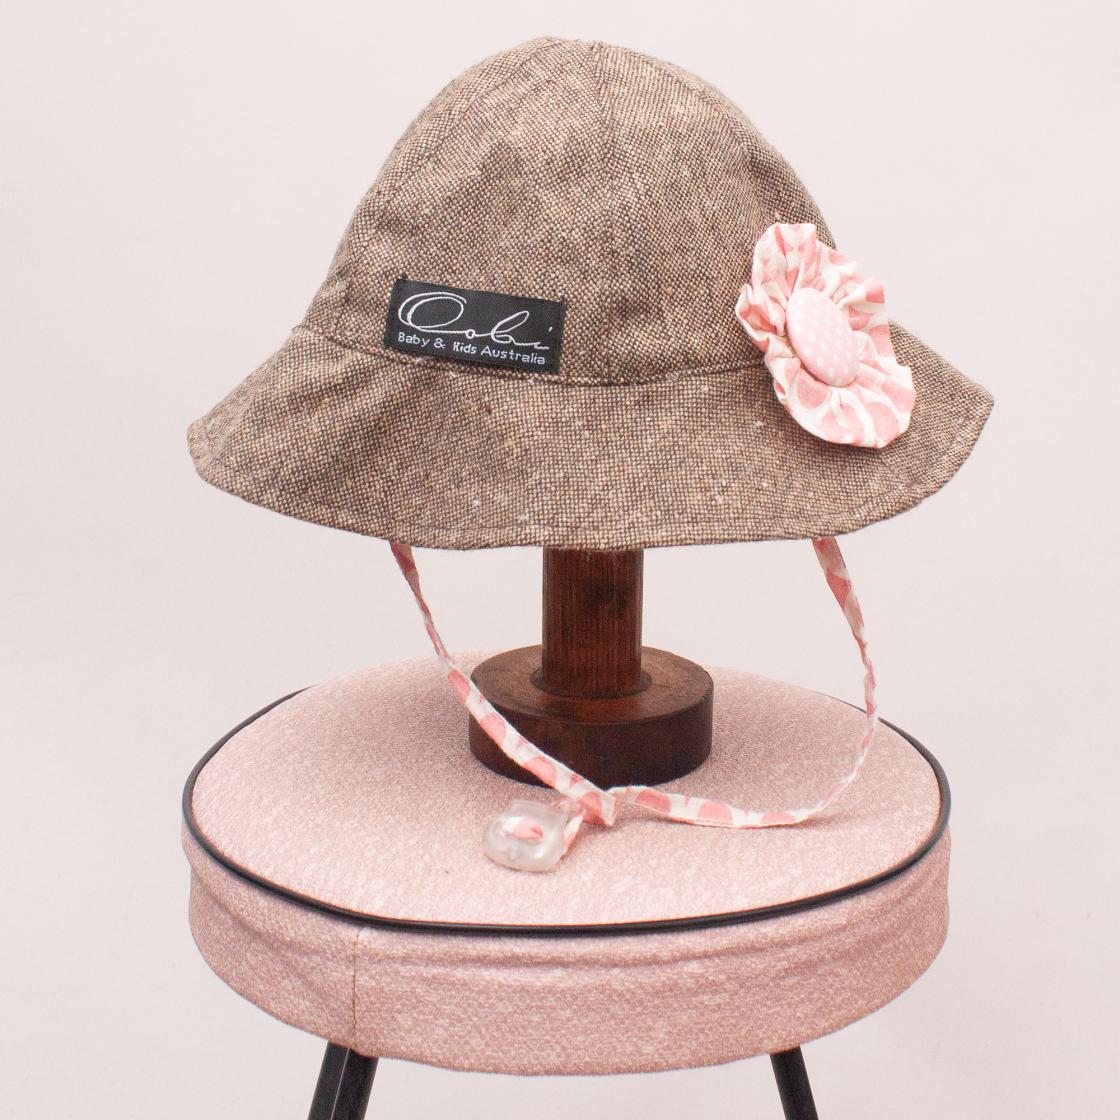 Oobi Brown and Flower Sun Hat - Size S